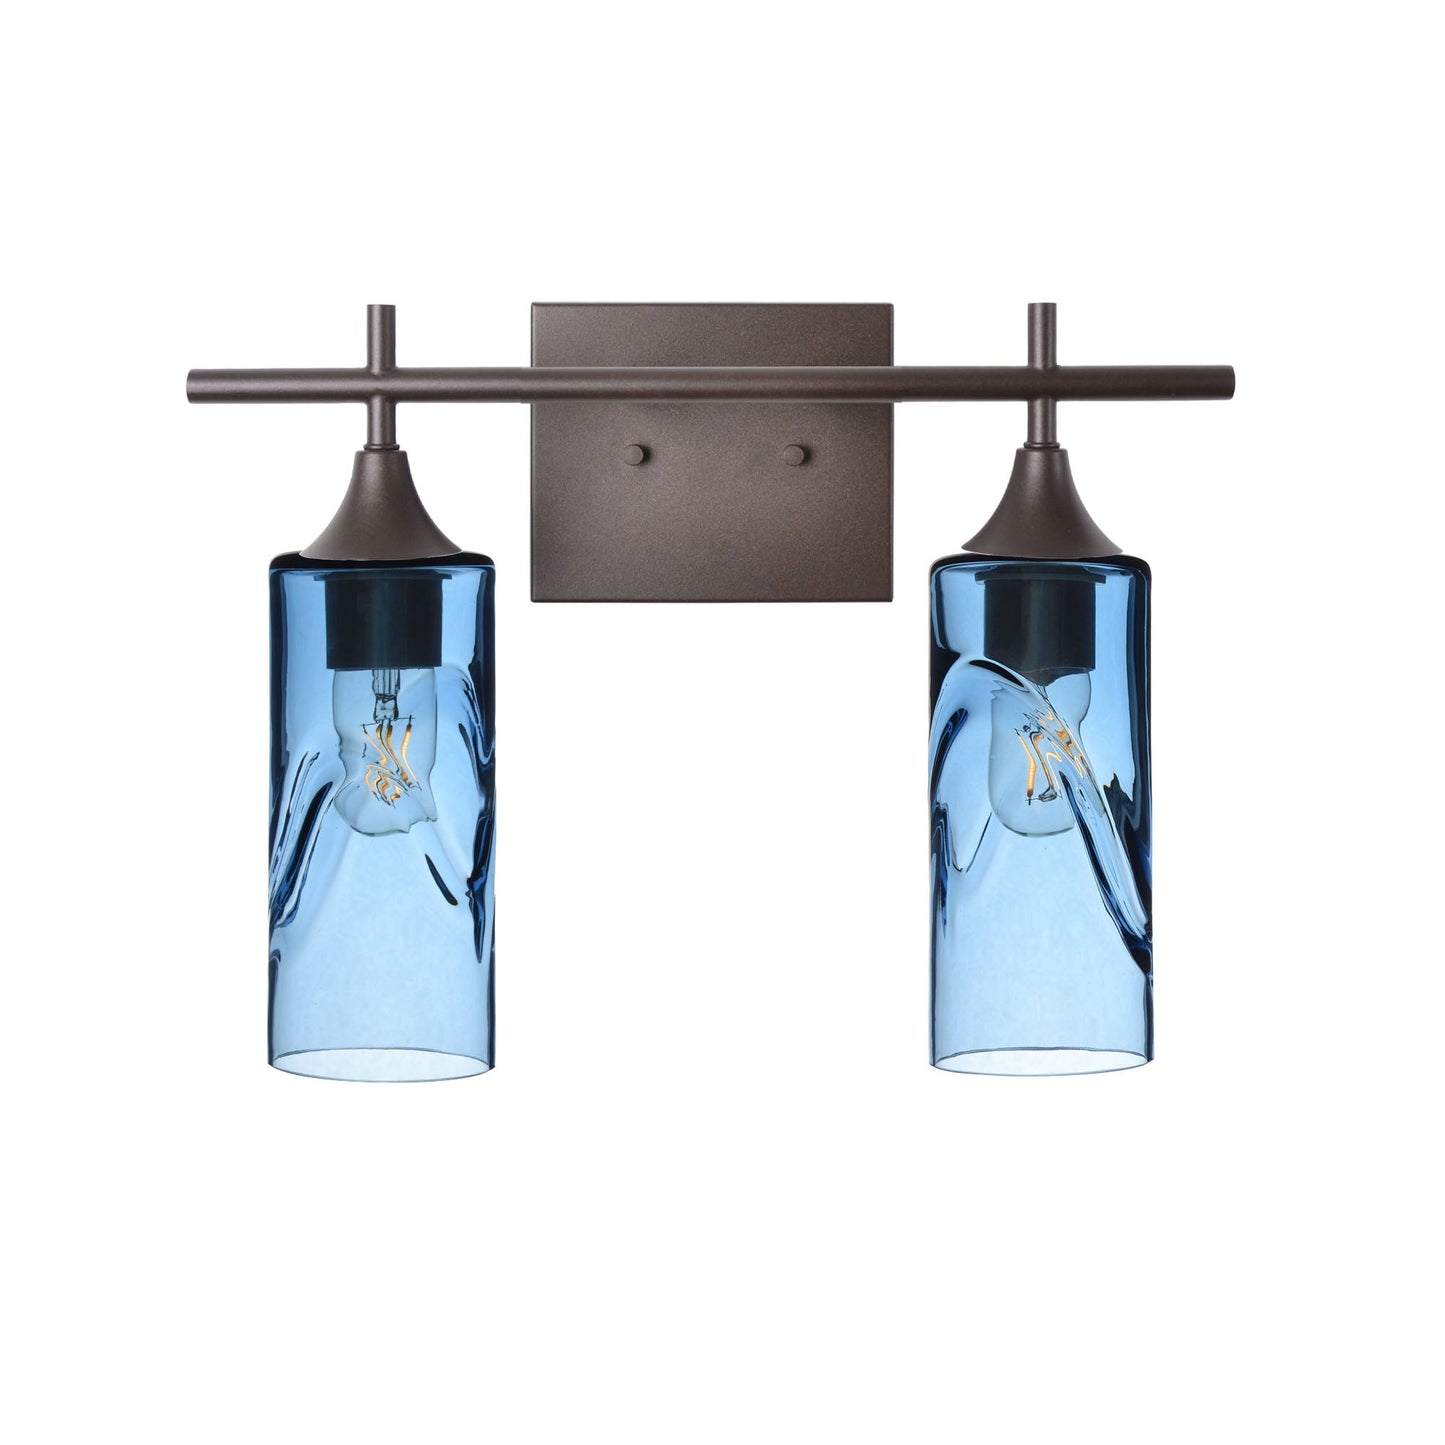 513 Swell: 2 Light Wall Vanity-Glass-Bicycle Glass Co - Hotshop-Steel Blue-Dark Bronze-Bicycle Glass Co